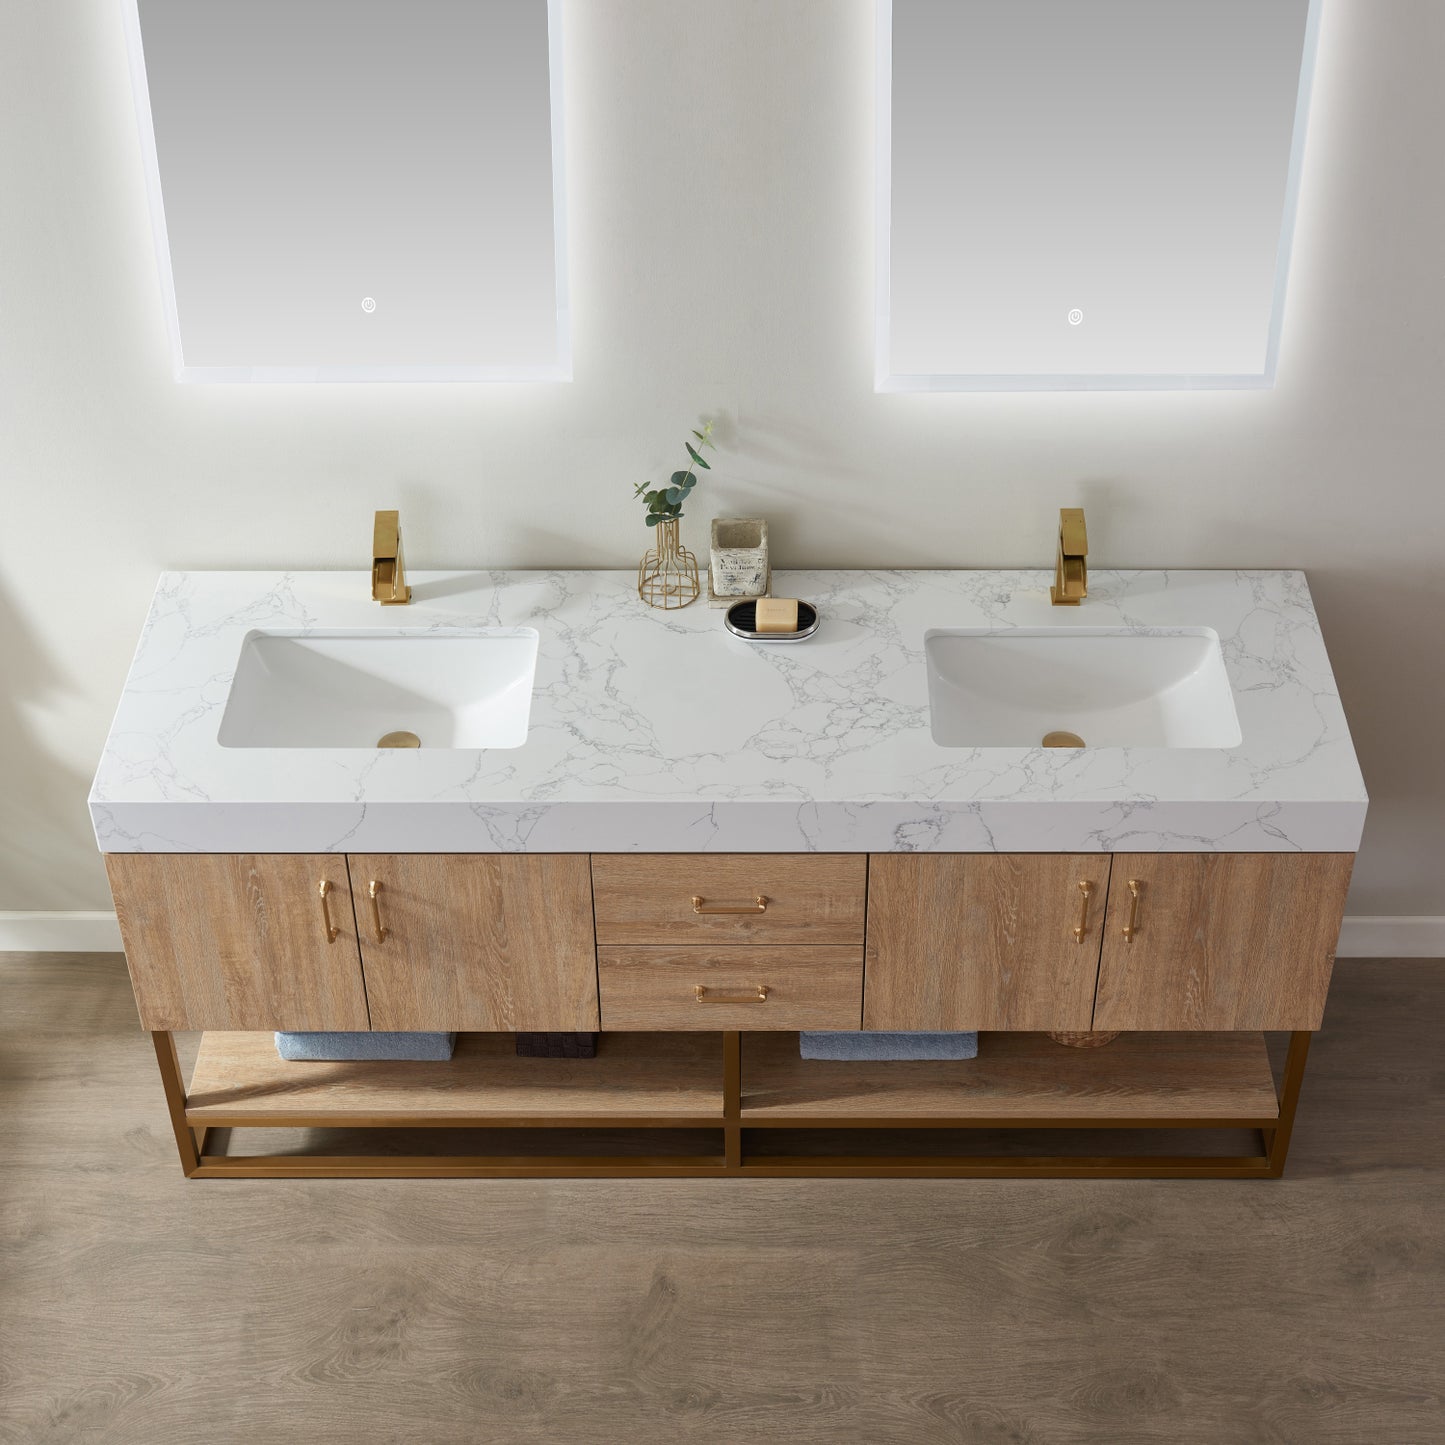 Alistair 72" Double Vanity in North American Oak with White Grain Stone Countertop With Mirror